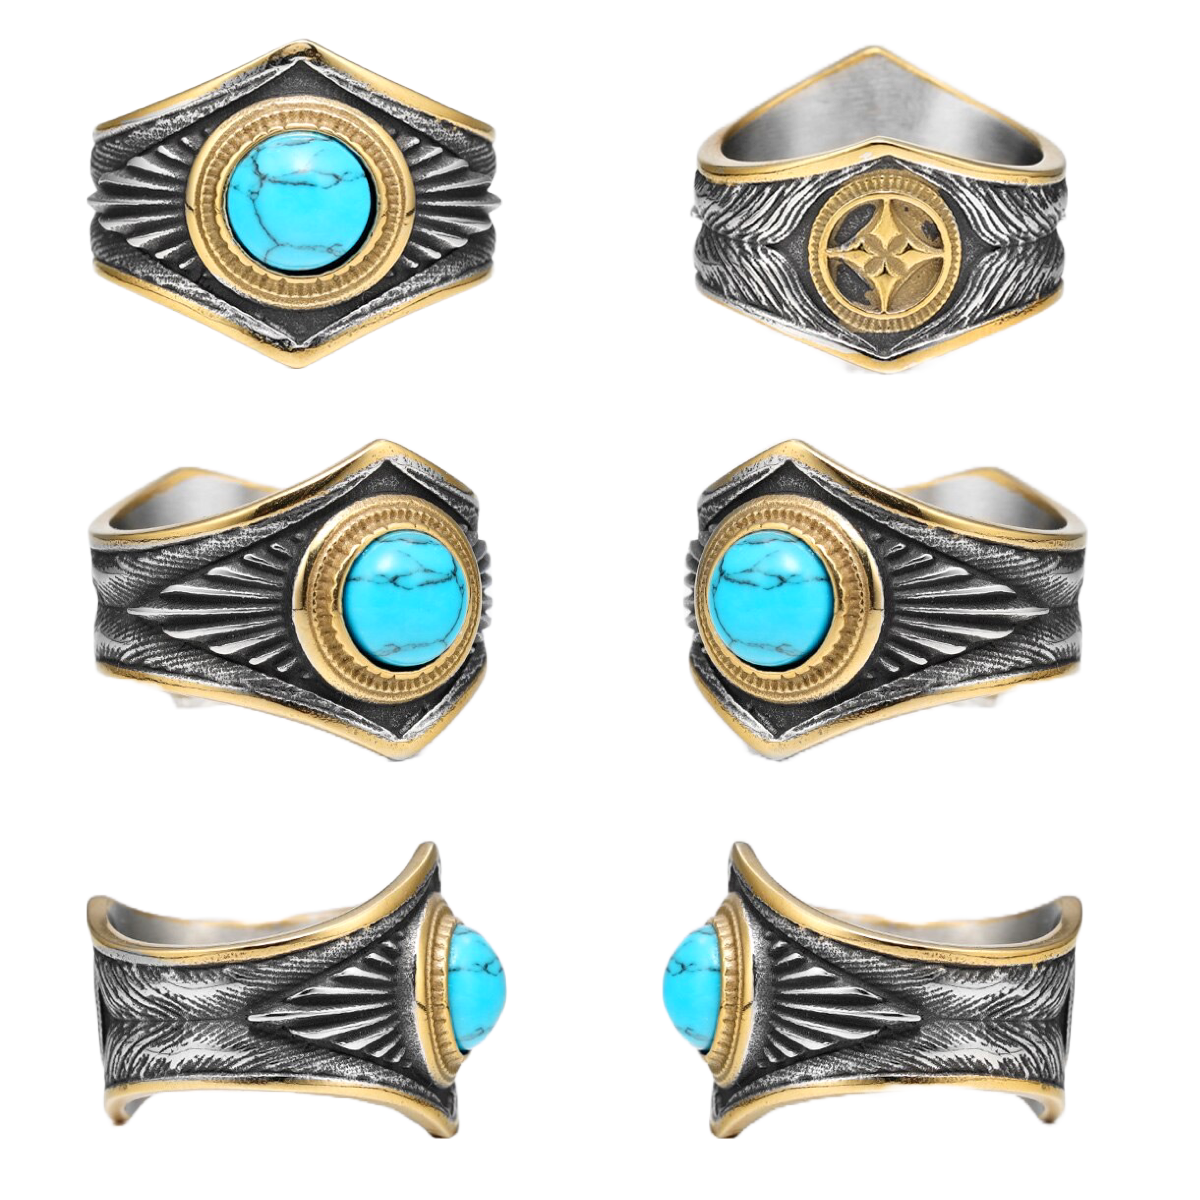 A Native Stone Ancestral Ring with a turquoise stone by Rebel Saint Co.